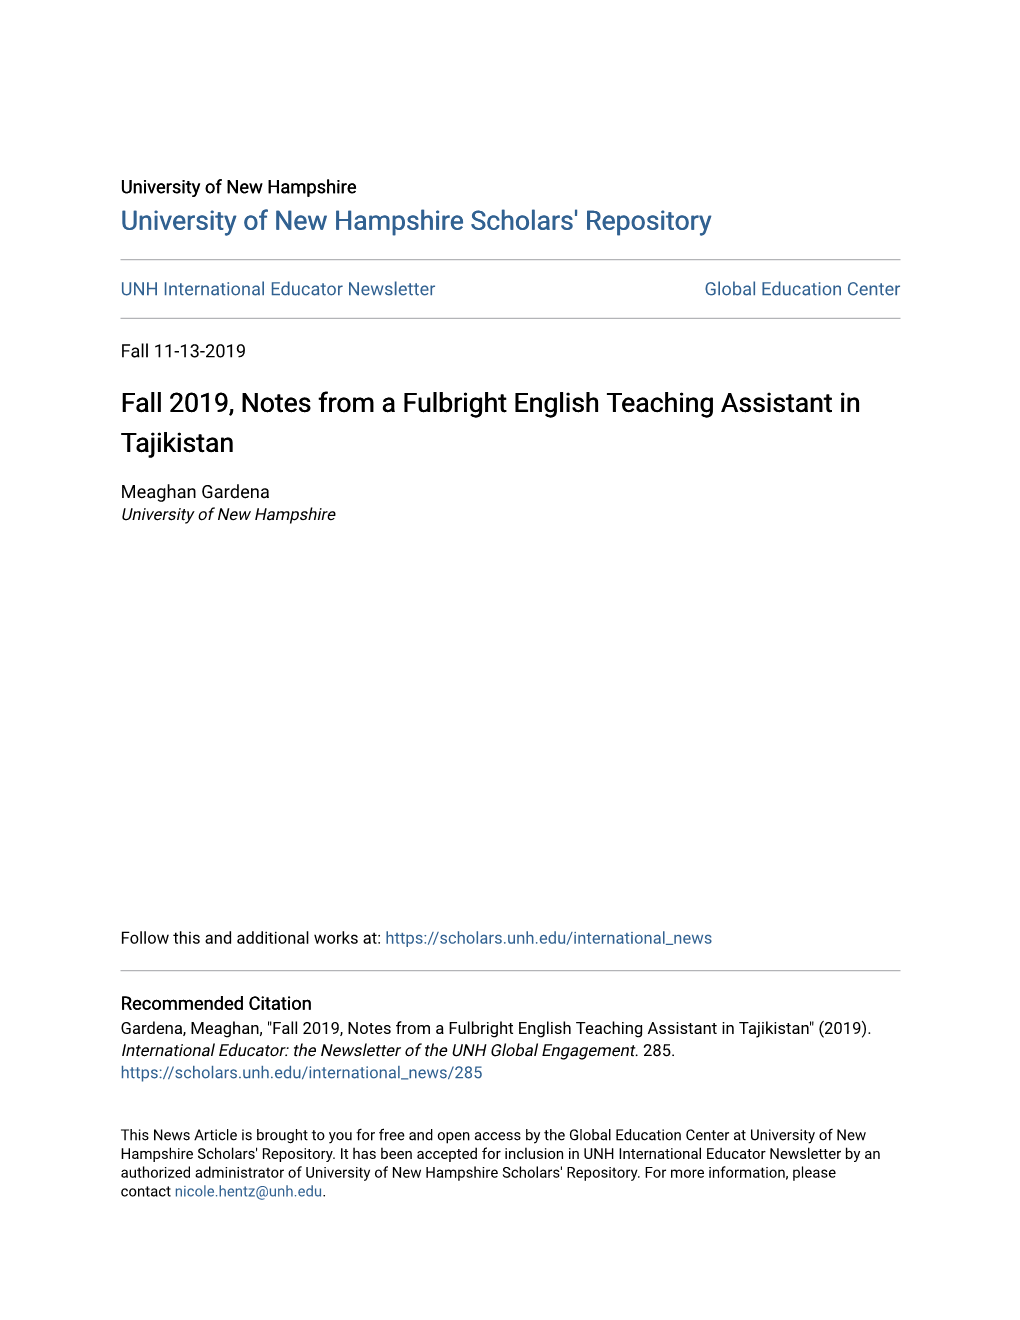 Fall 2019, Notes from a Fulbright English Teaching Assistant in Tajikistan